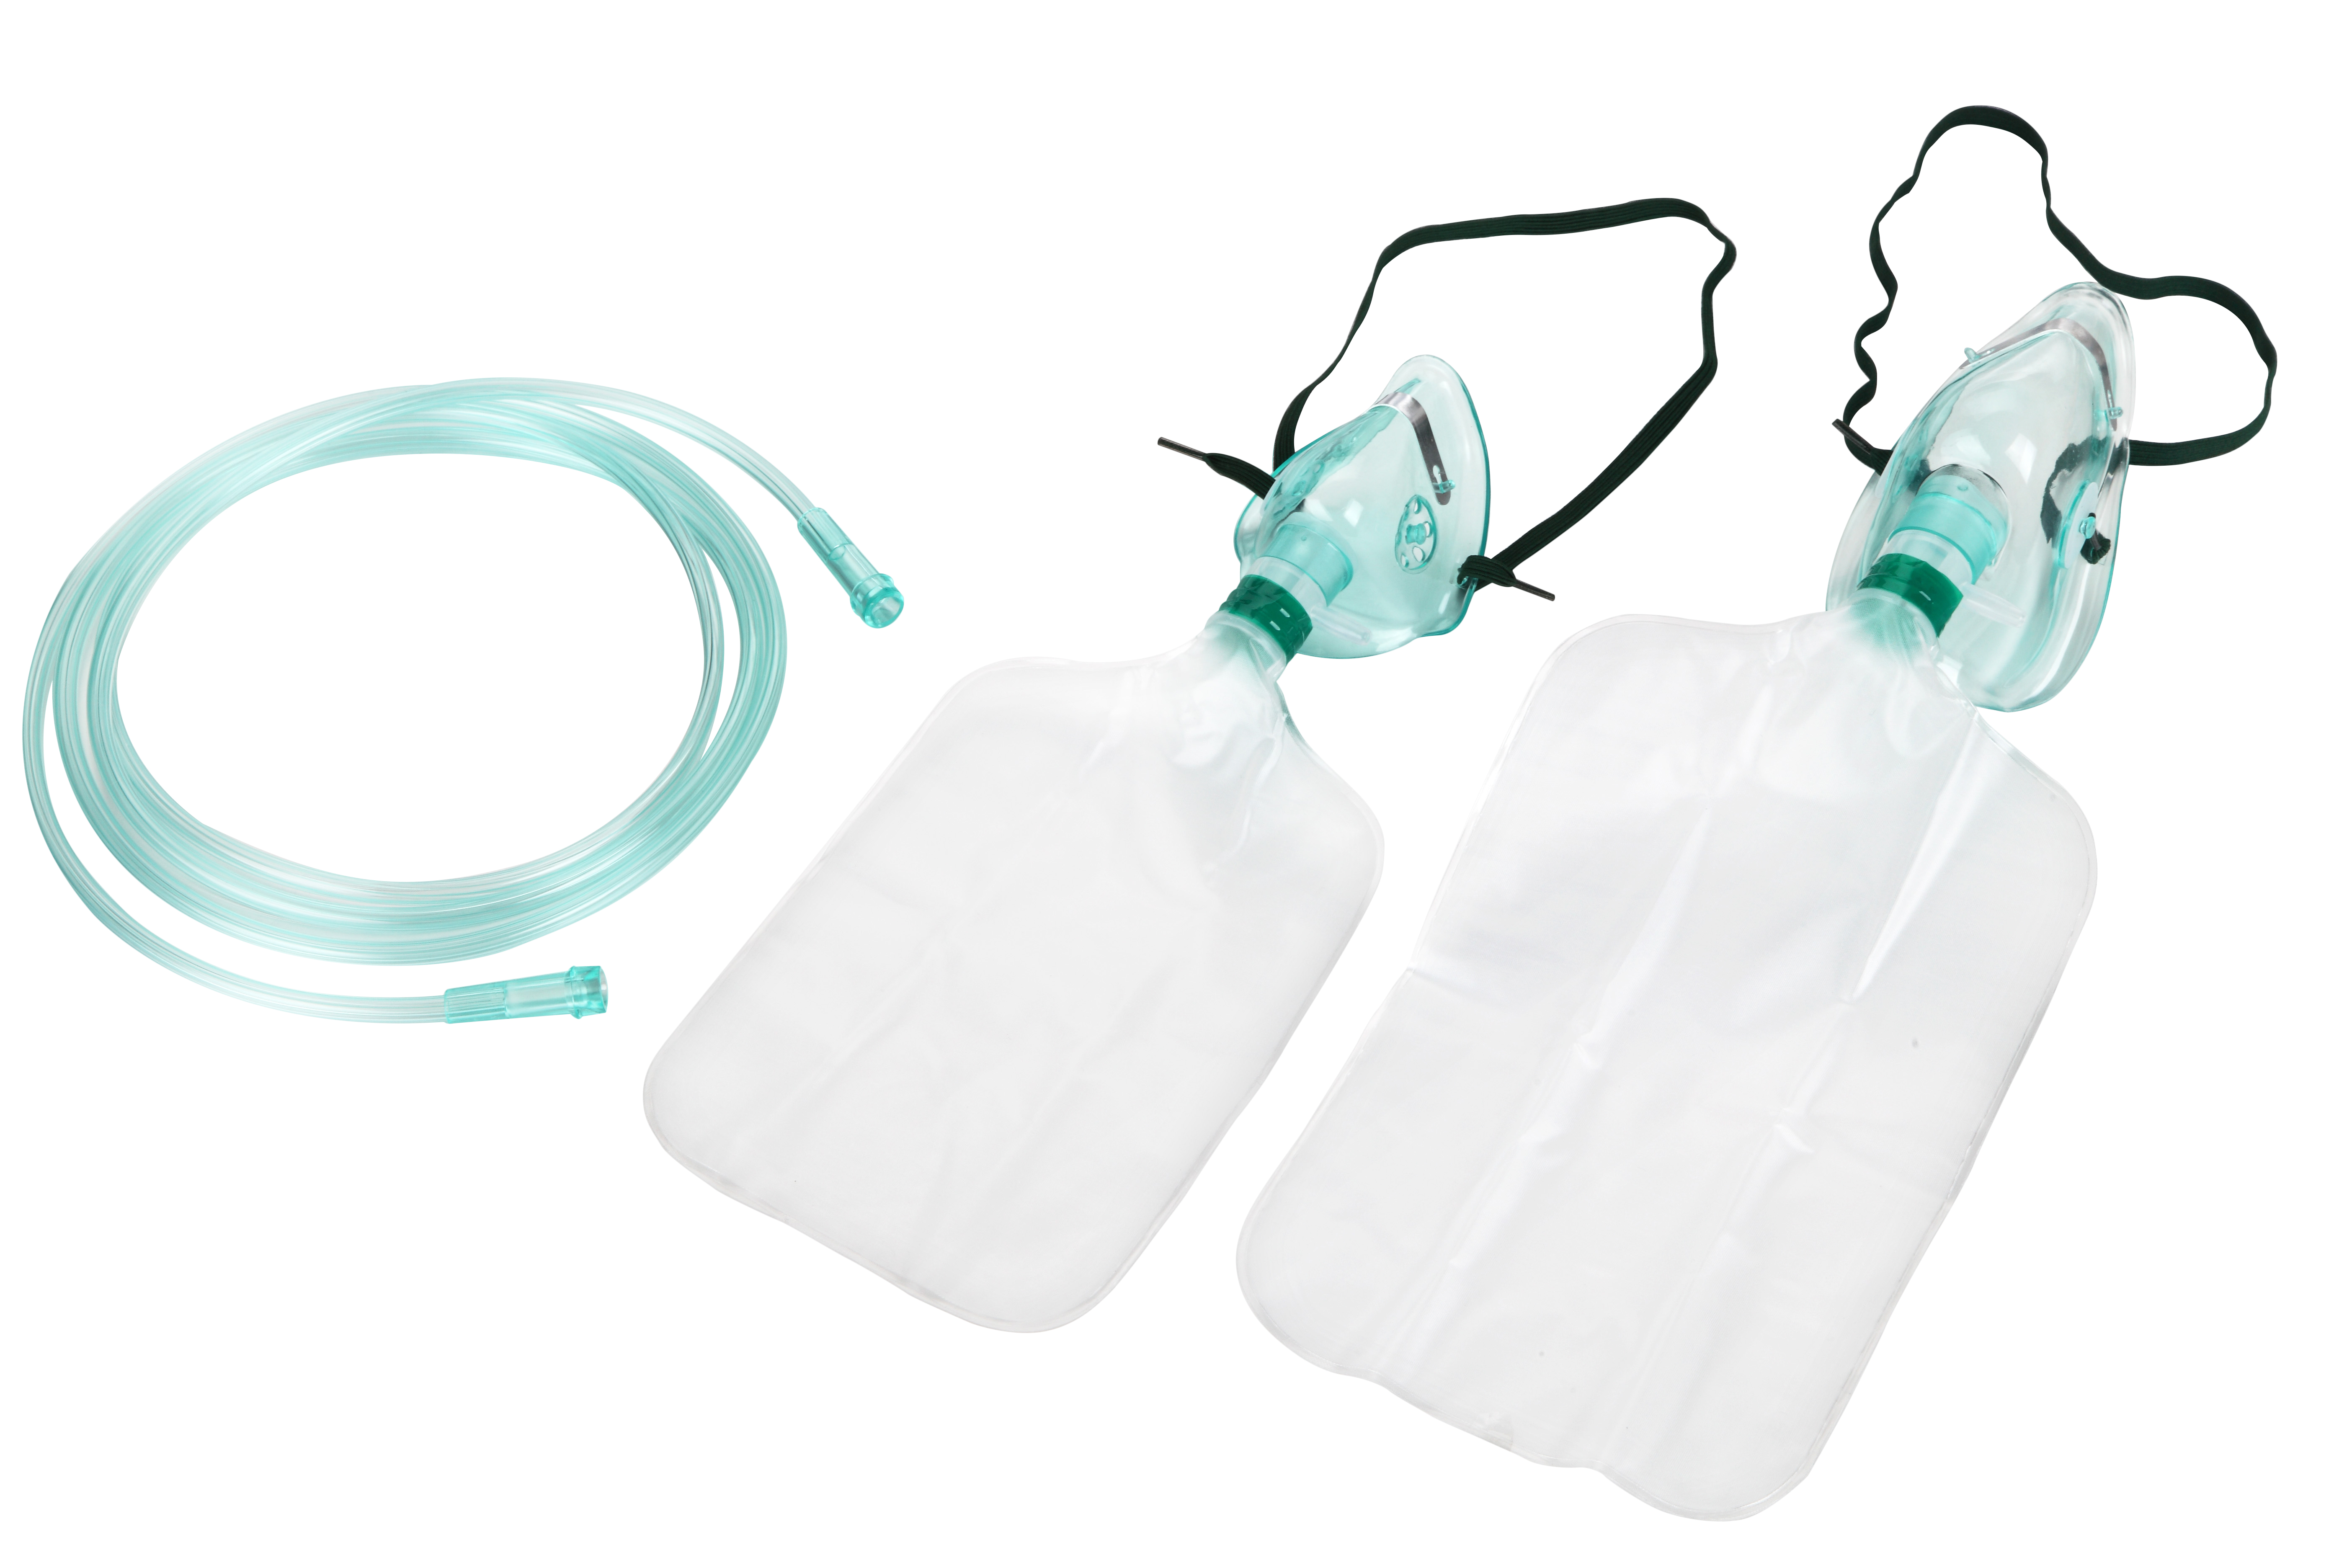 OXYGEN MASK WITH RESERVOIR BAG & TUBE - Hospital Equipment Manufacturing  Company